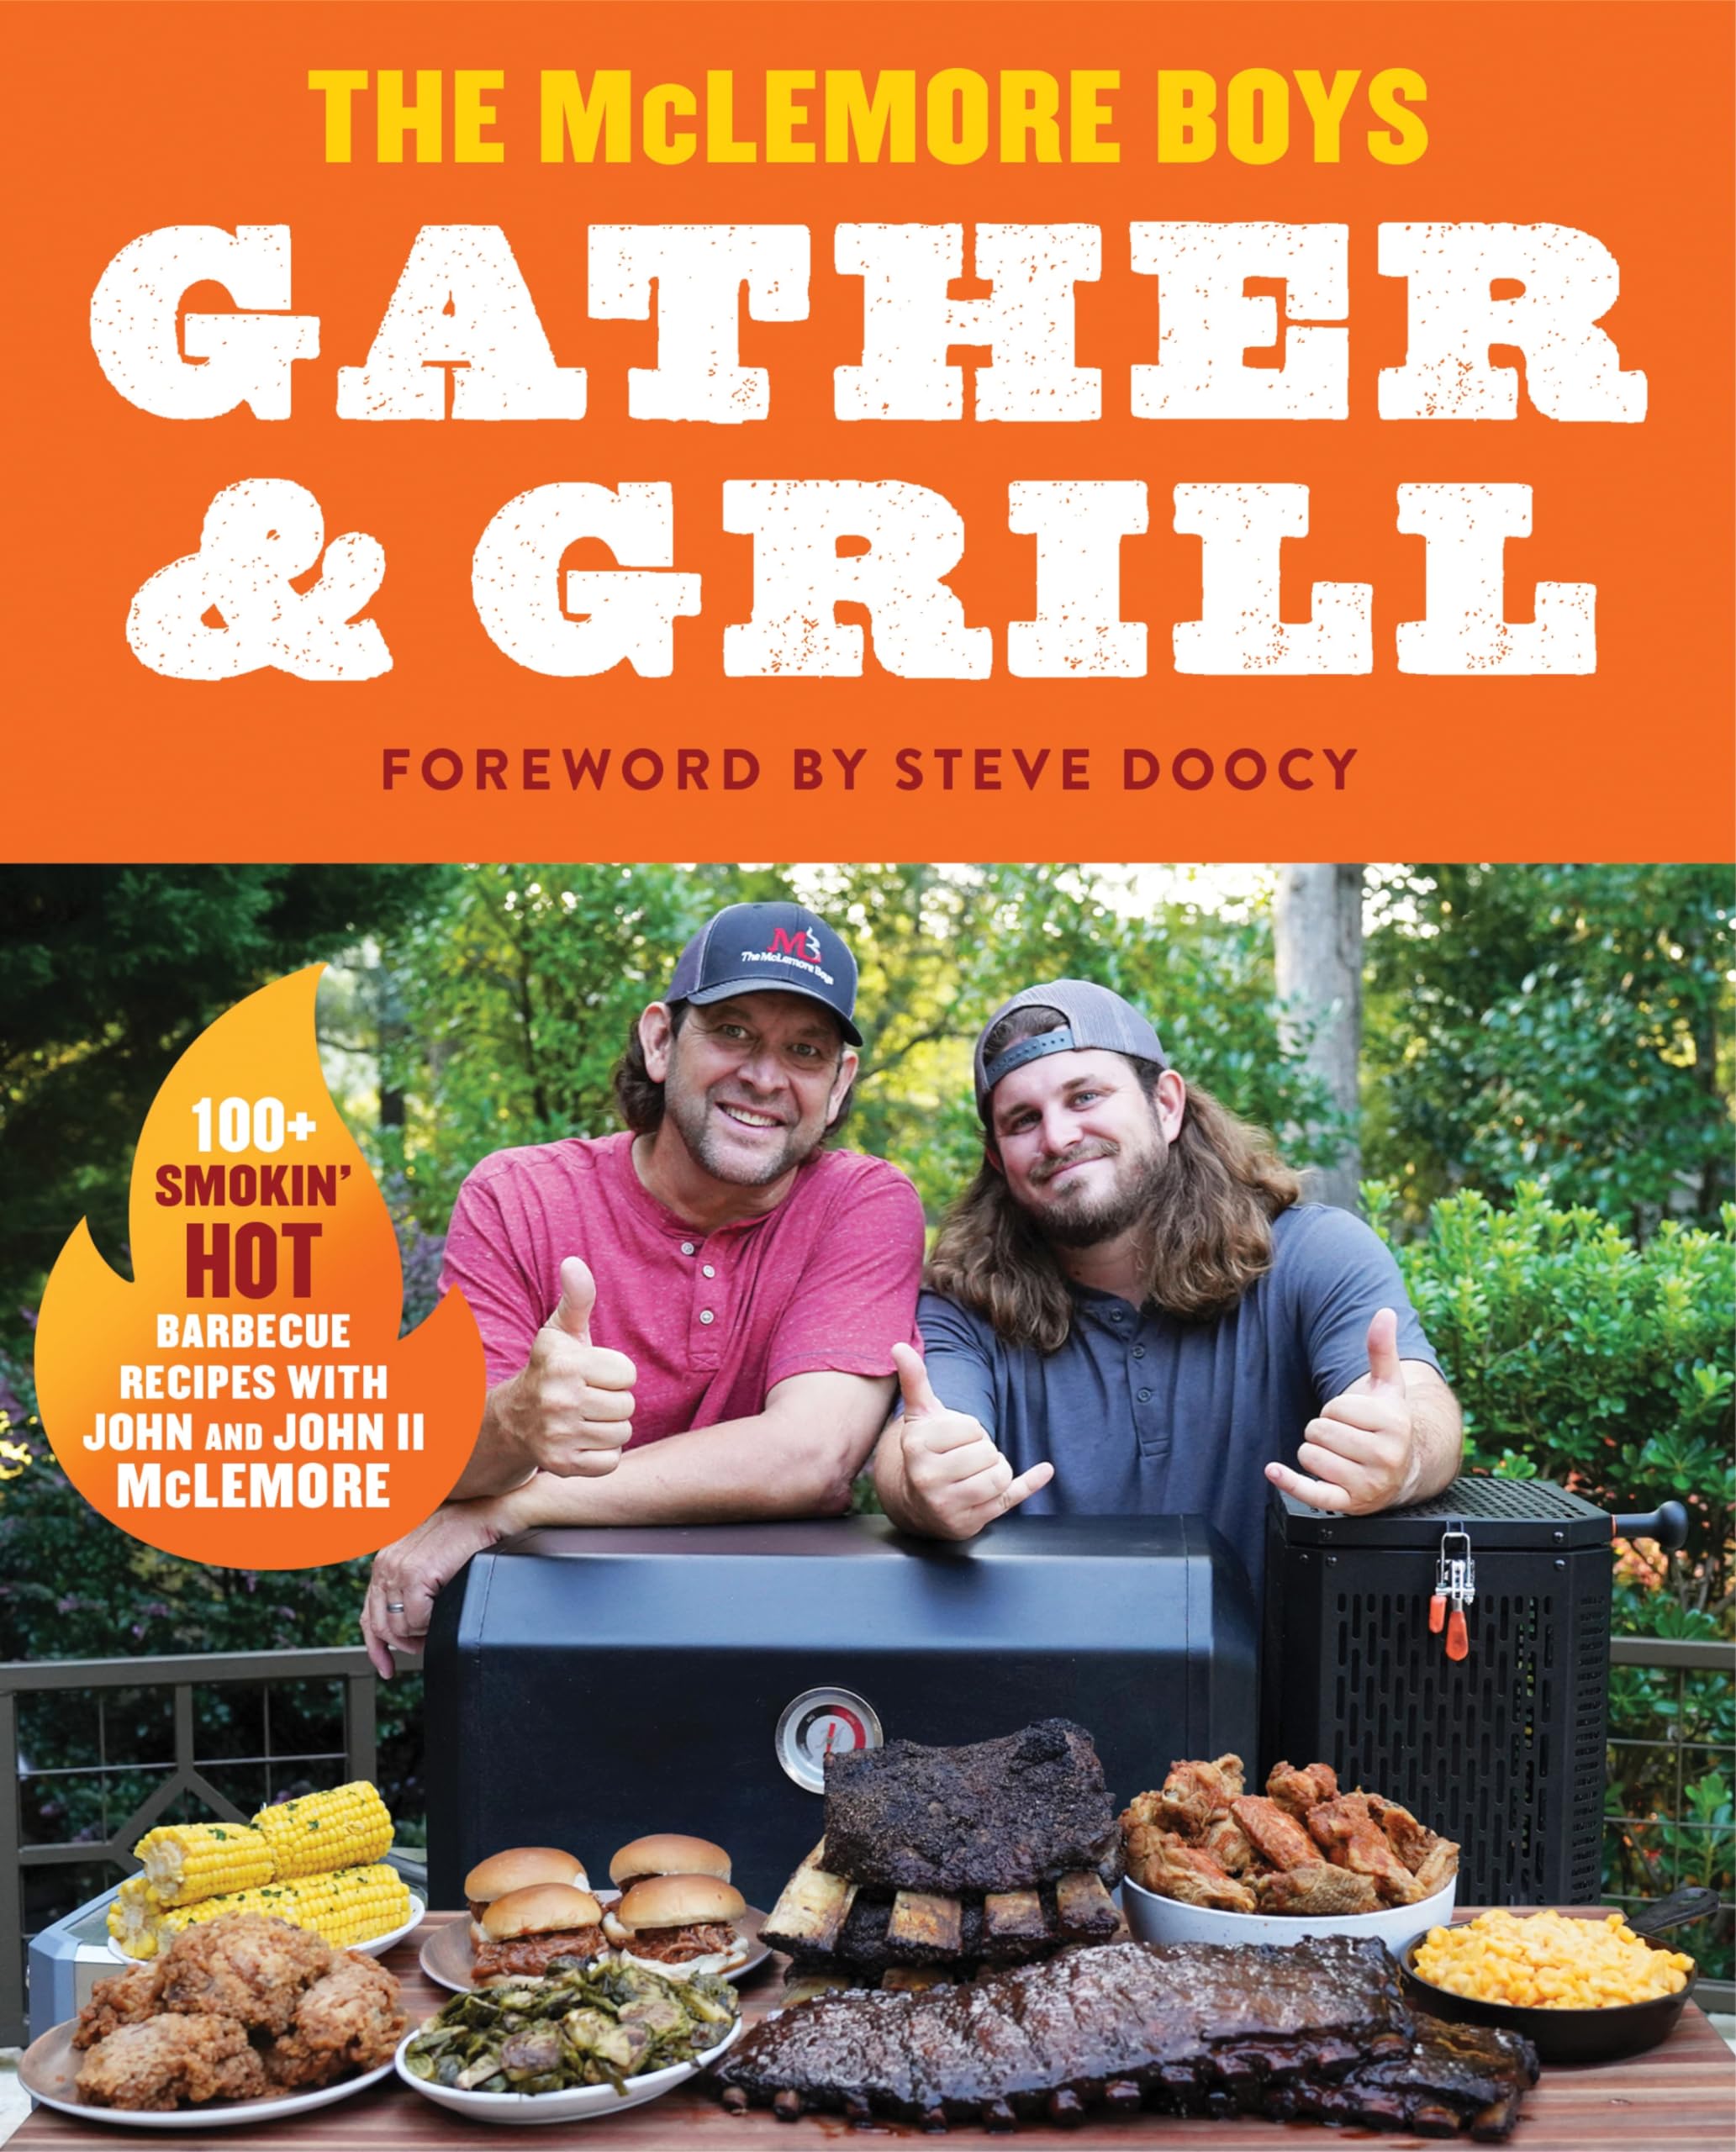 Gather and Grill by McLemore, John Darin